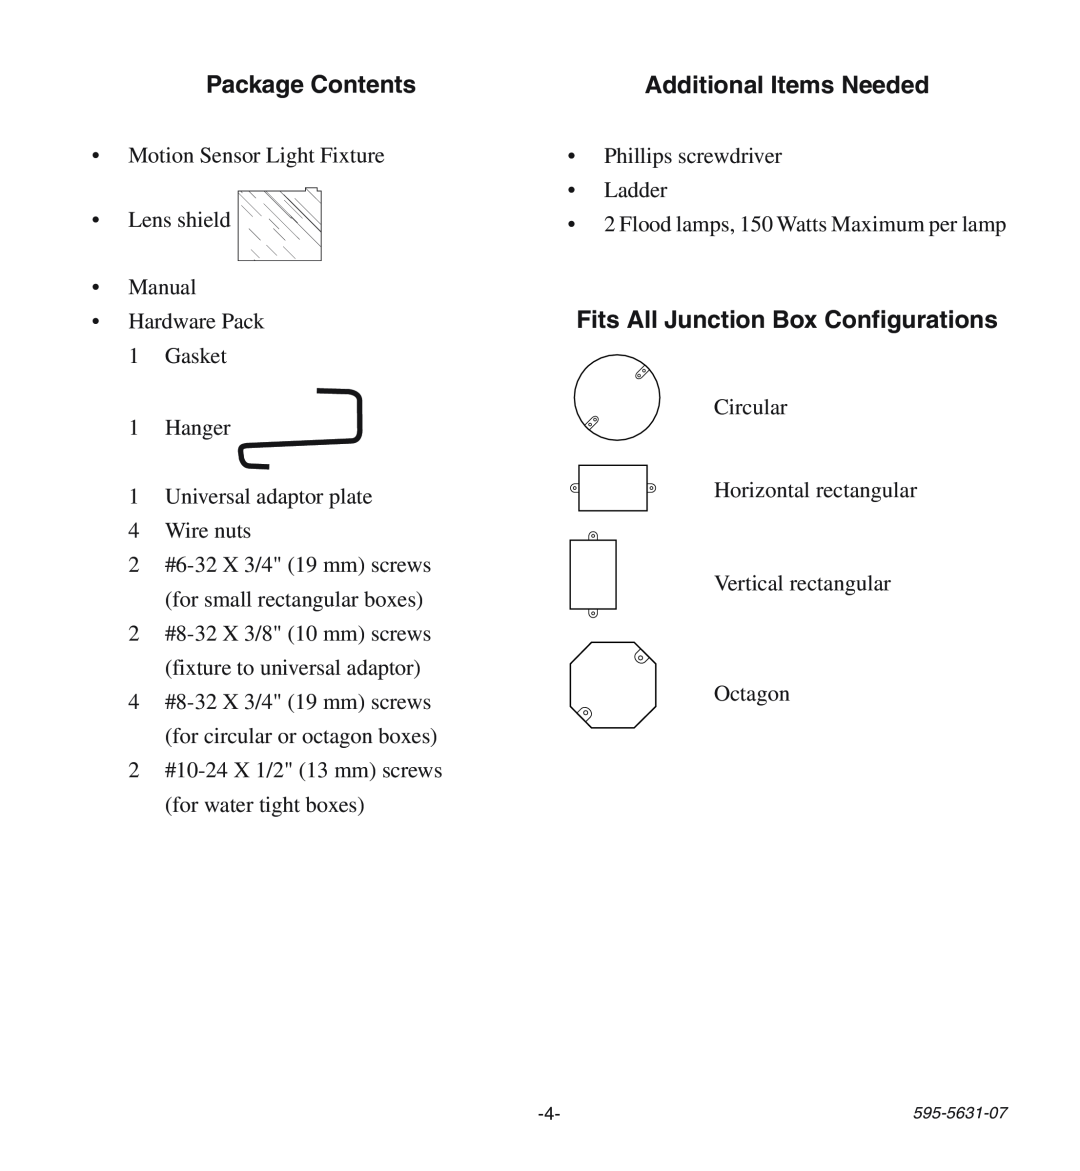 Desa HD-9240 manual Package Contents, Additional Items Needed, Fits All Junction Box Configurations 